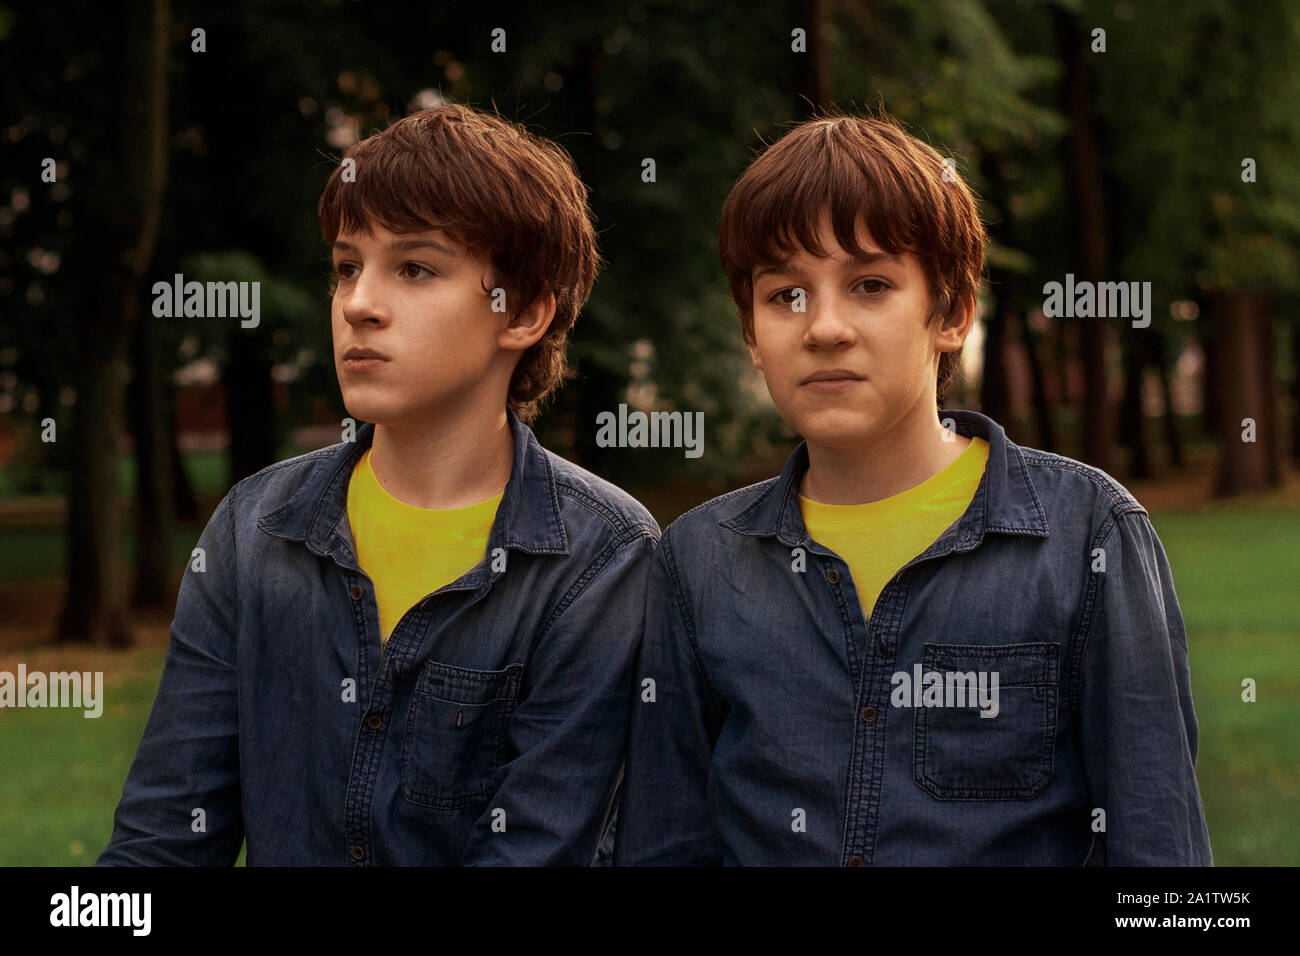 Twins teenagers boys in the park. Transformation from a boy to a man. Transitional age Stock Photo